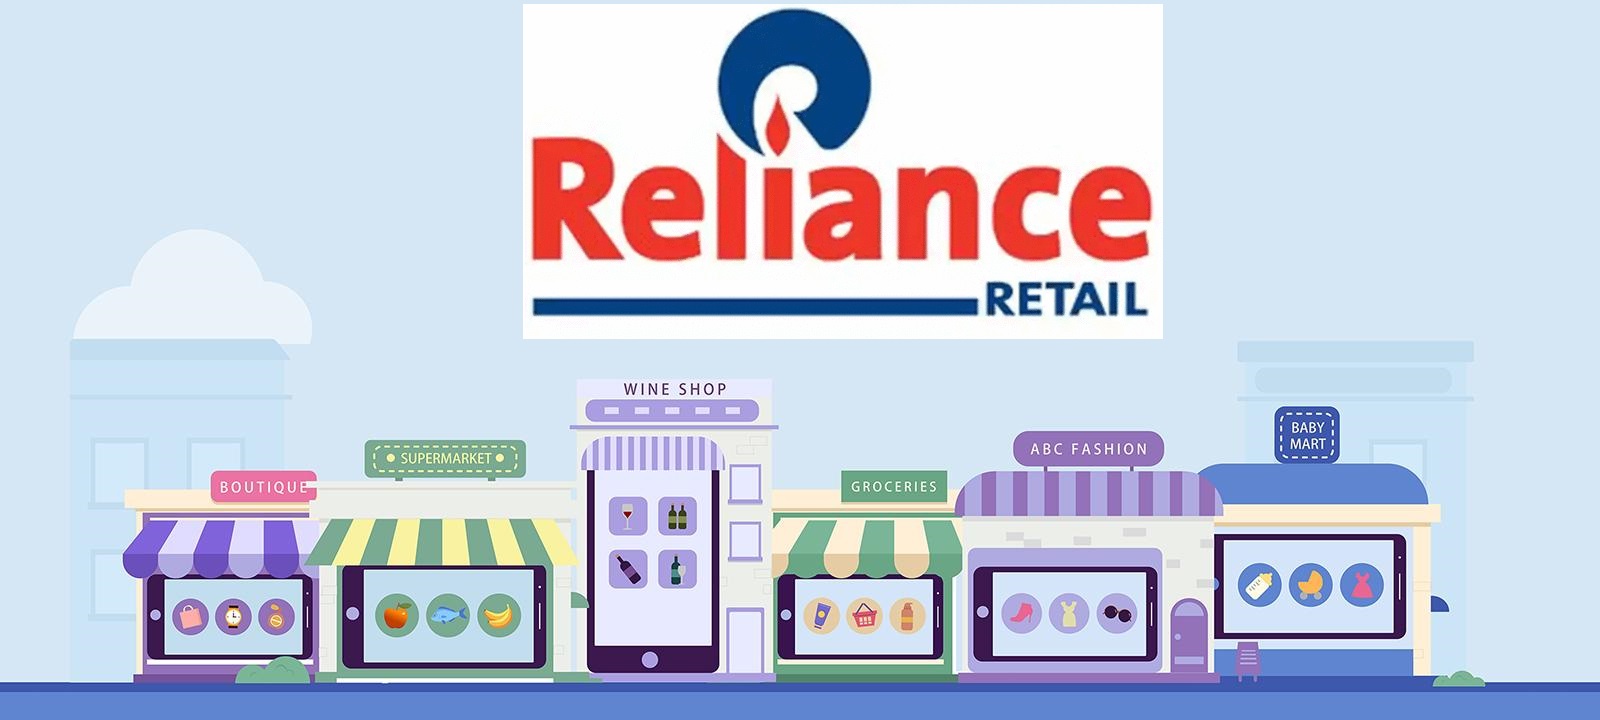 Reliance-Industries-Retail-Ecommerce-Acquisitions